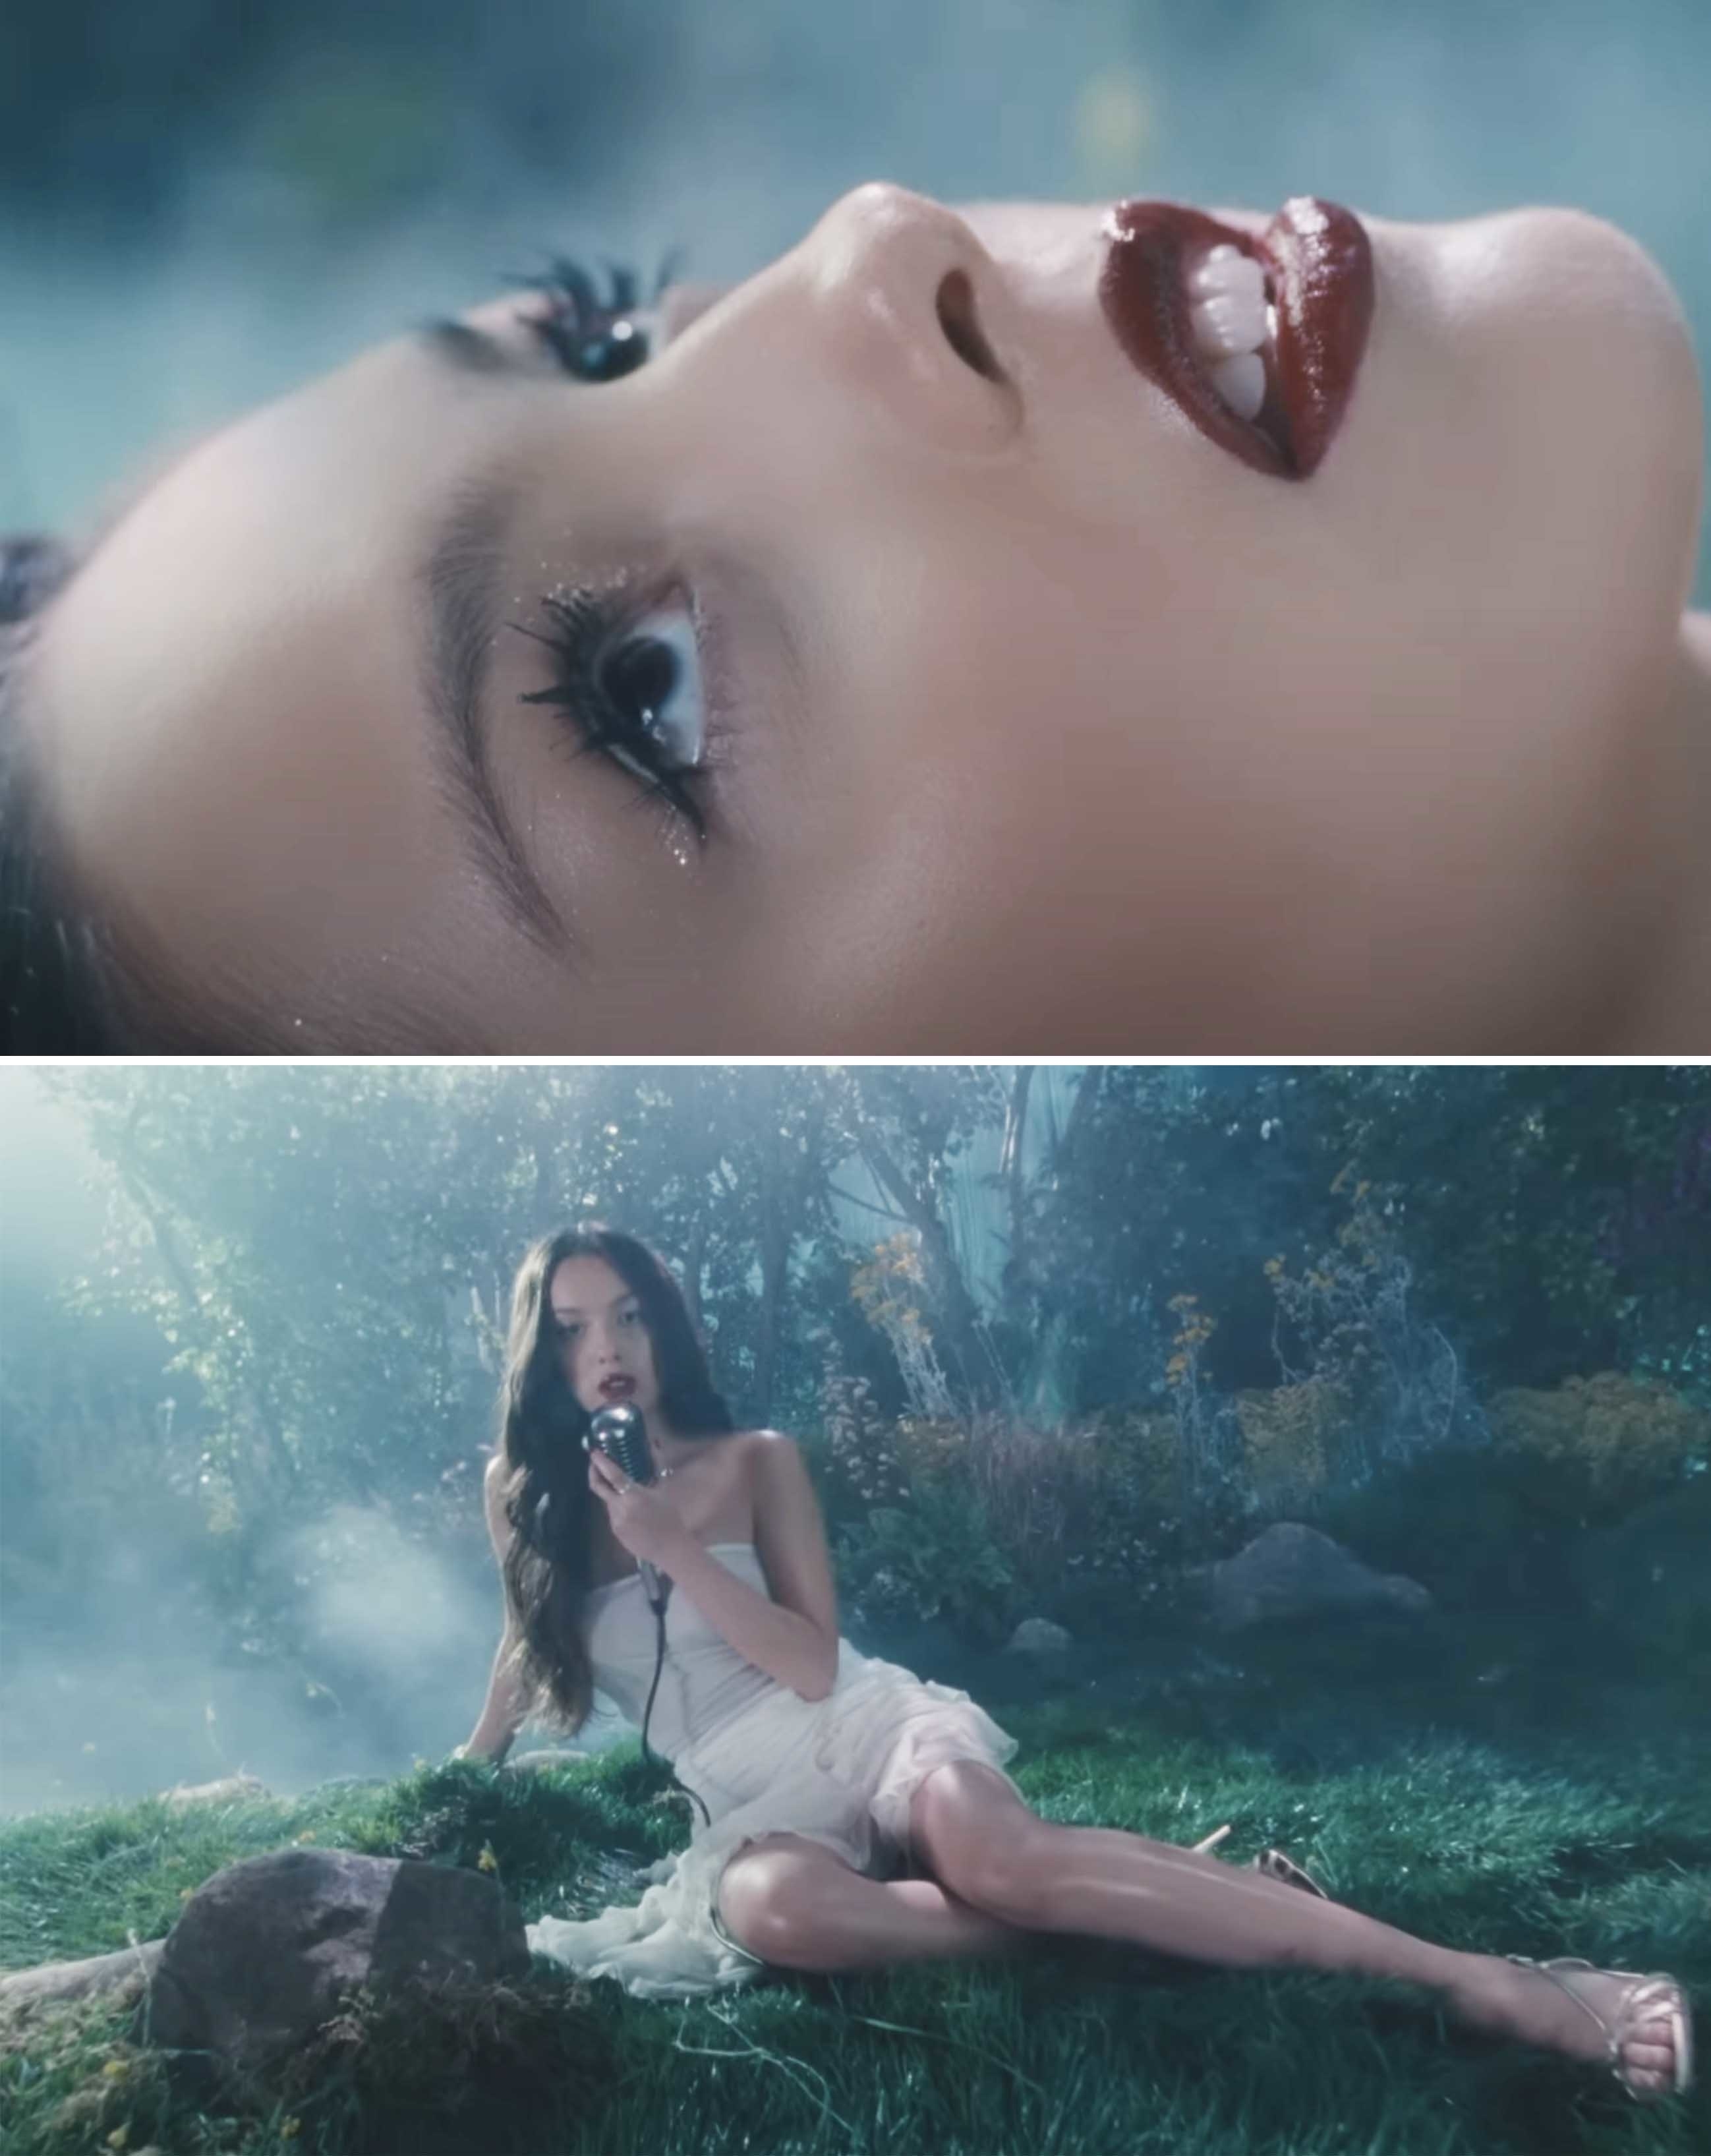 olivia singing in the woods in a music video